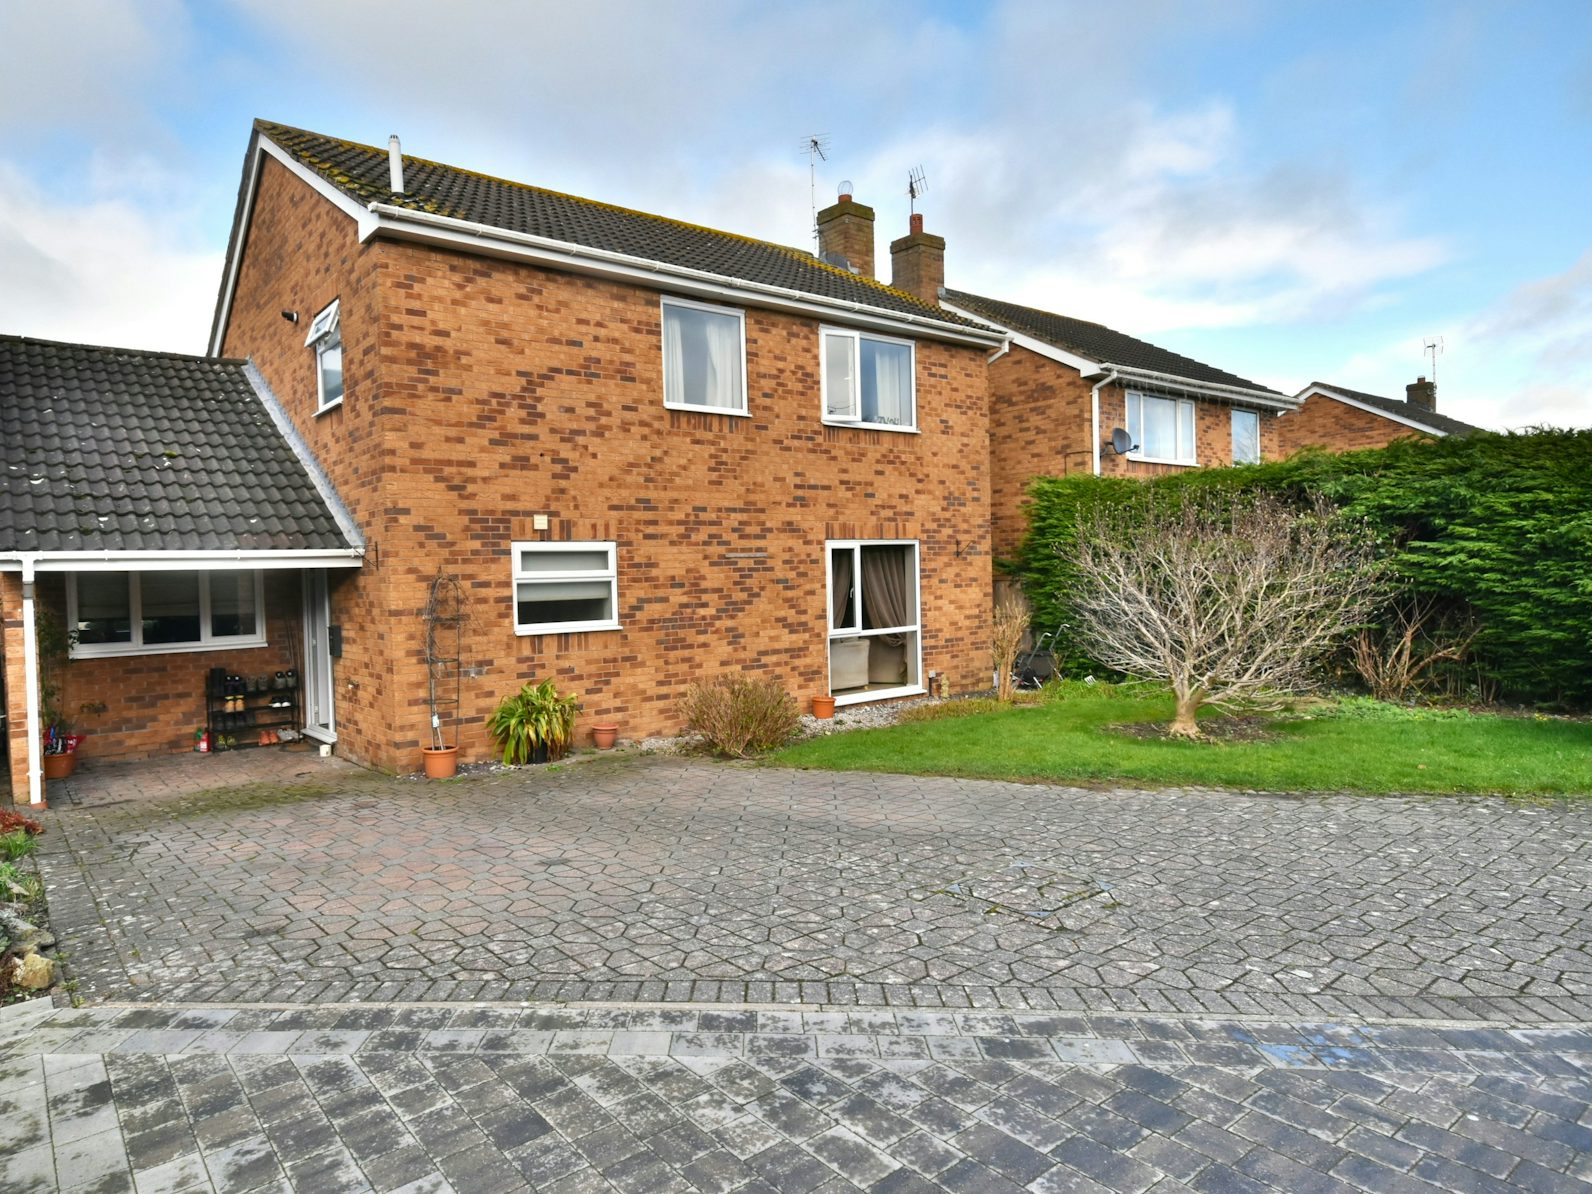 Detached House for sale on Hunters Meadow Crosslanes, Wrexham, LL13